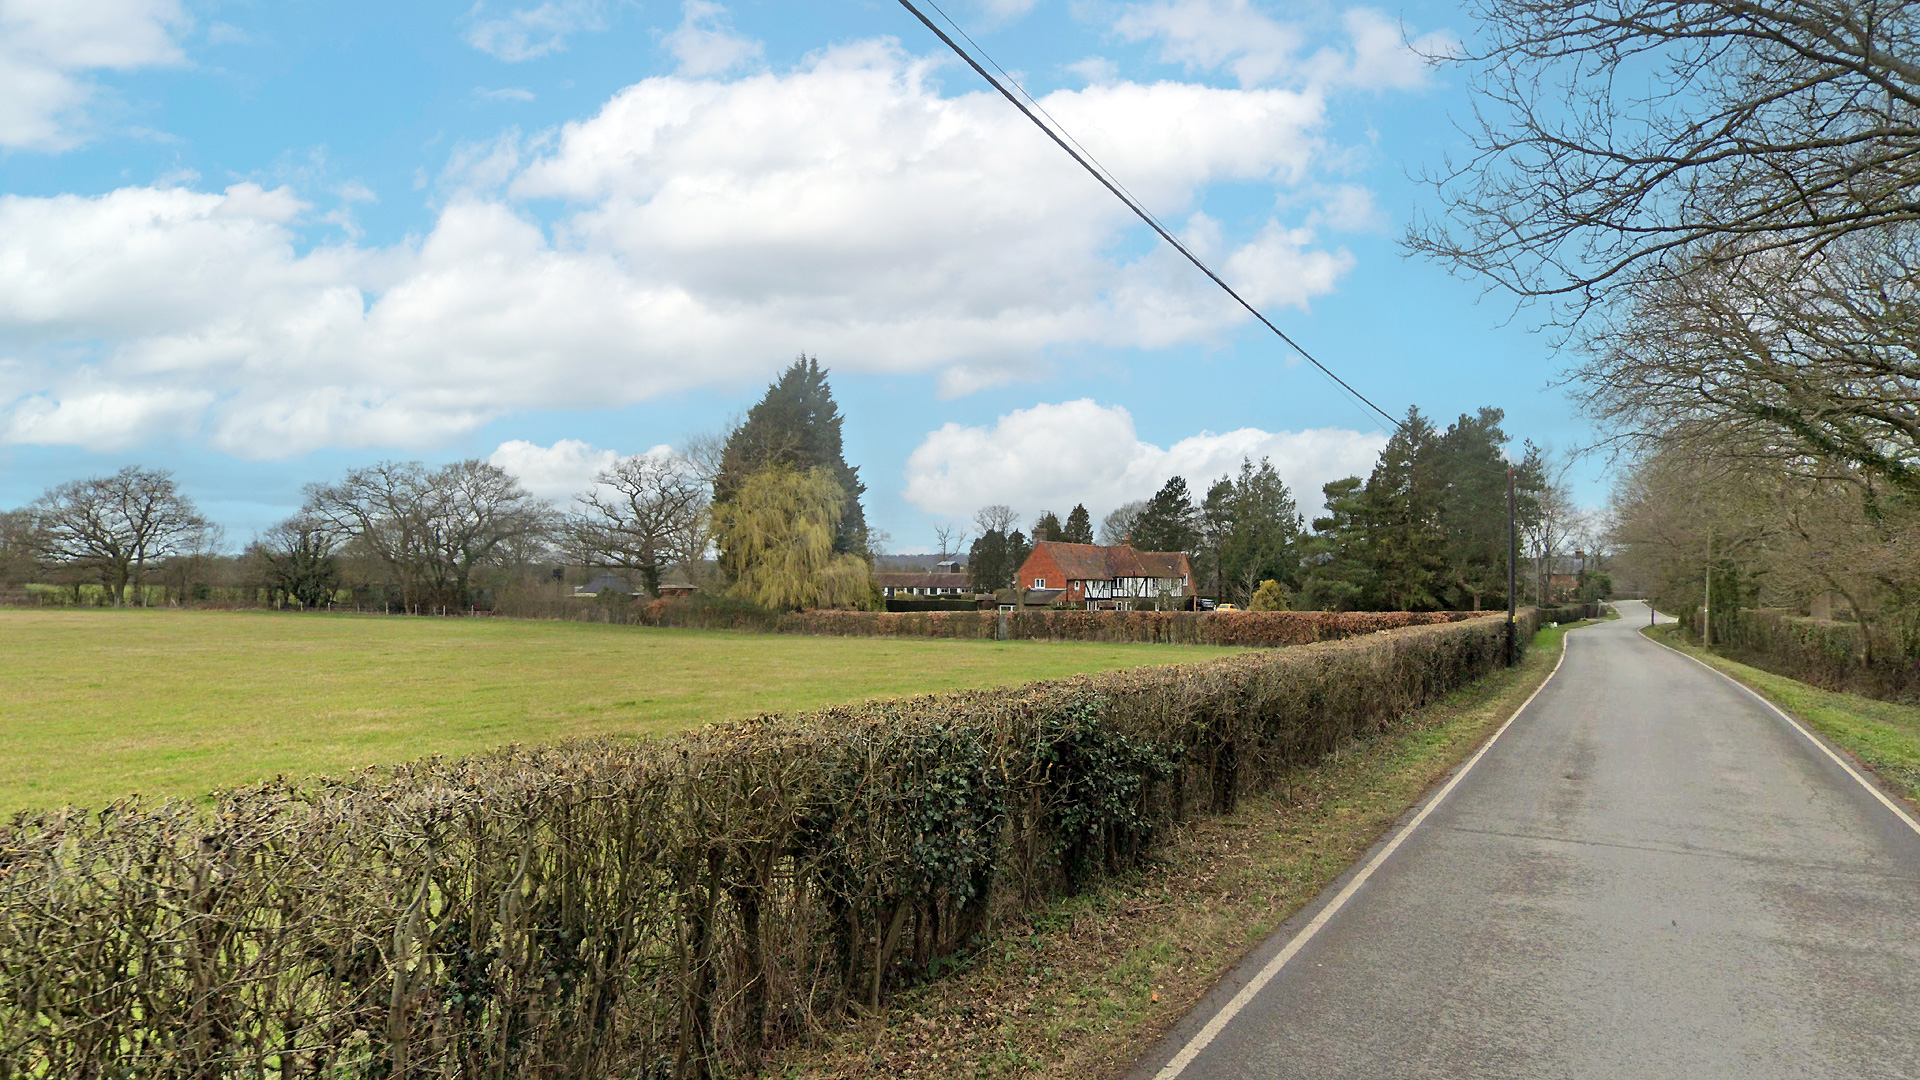 Land for sale in Newchapel, Lingfield street view